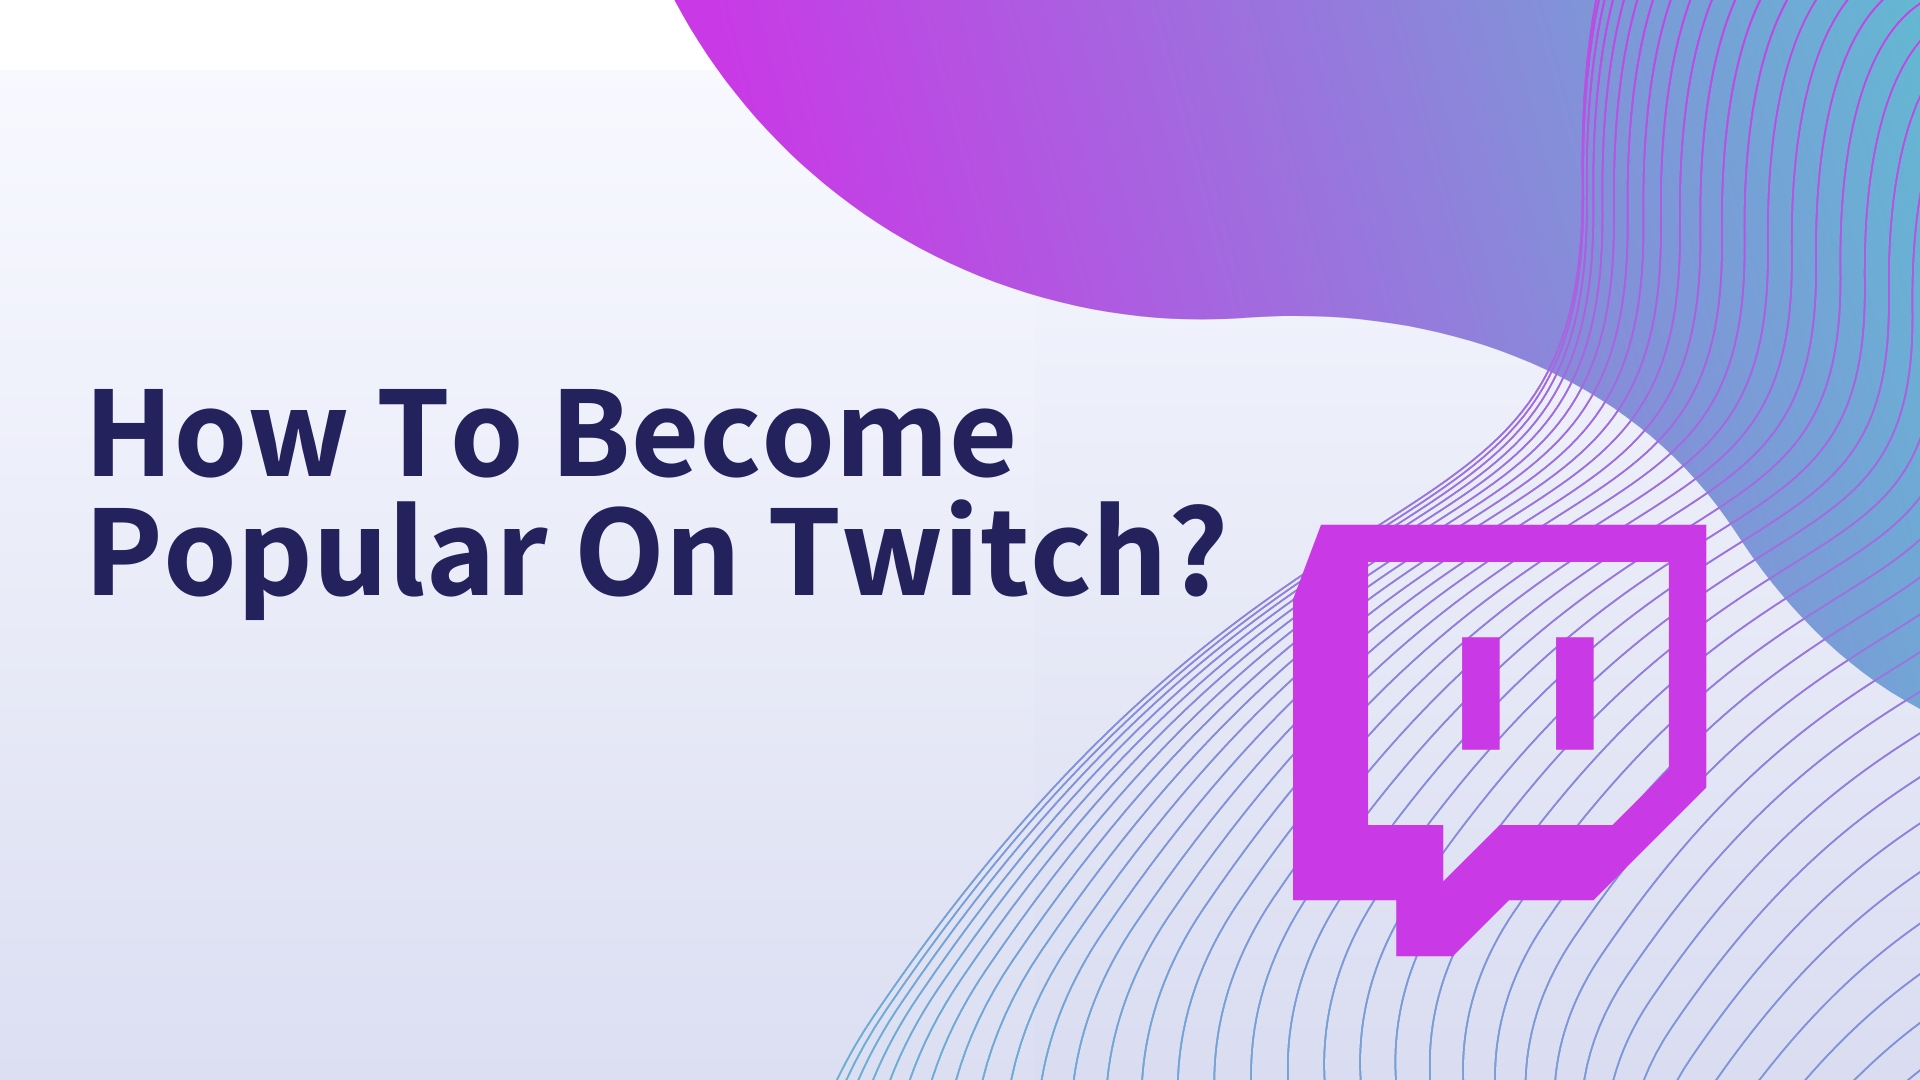 How To Become Popular On Twitch